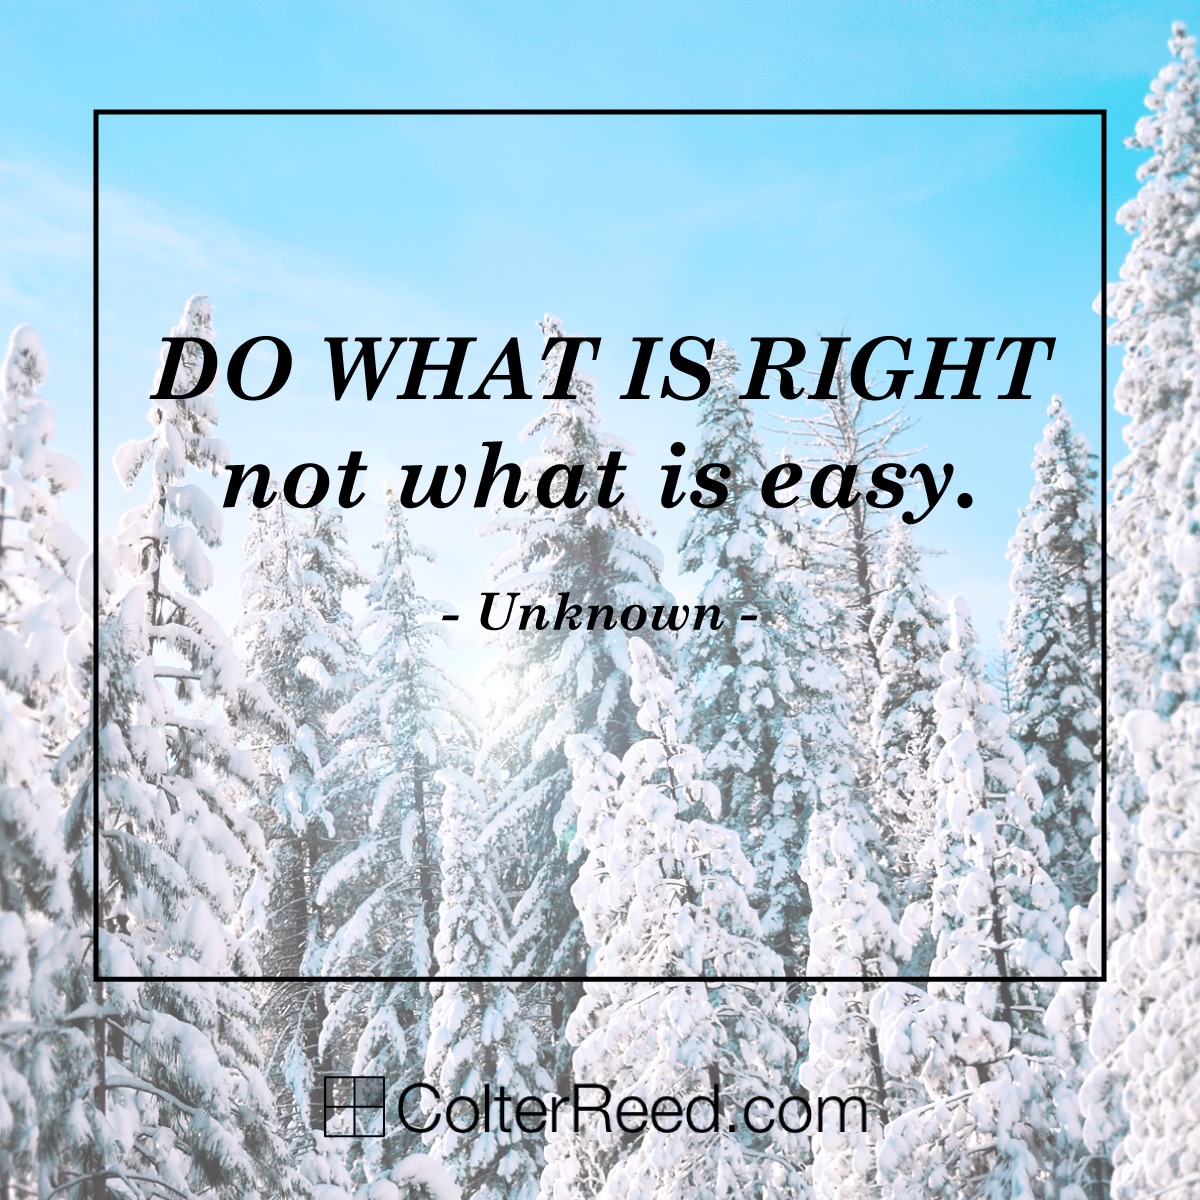 Do what is right, not what is easy. —Unknown